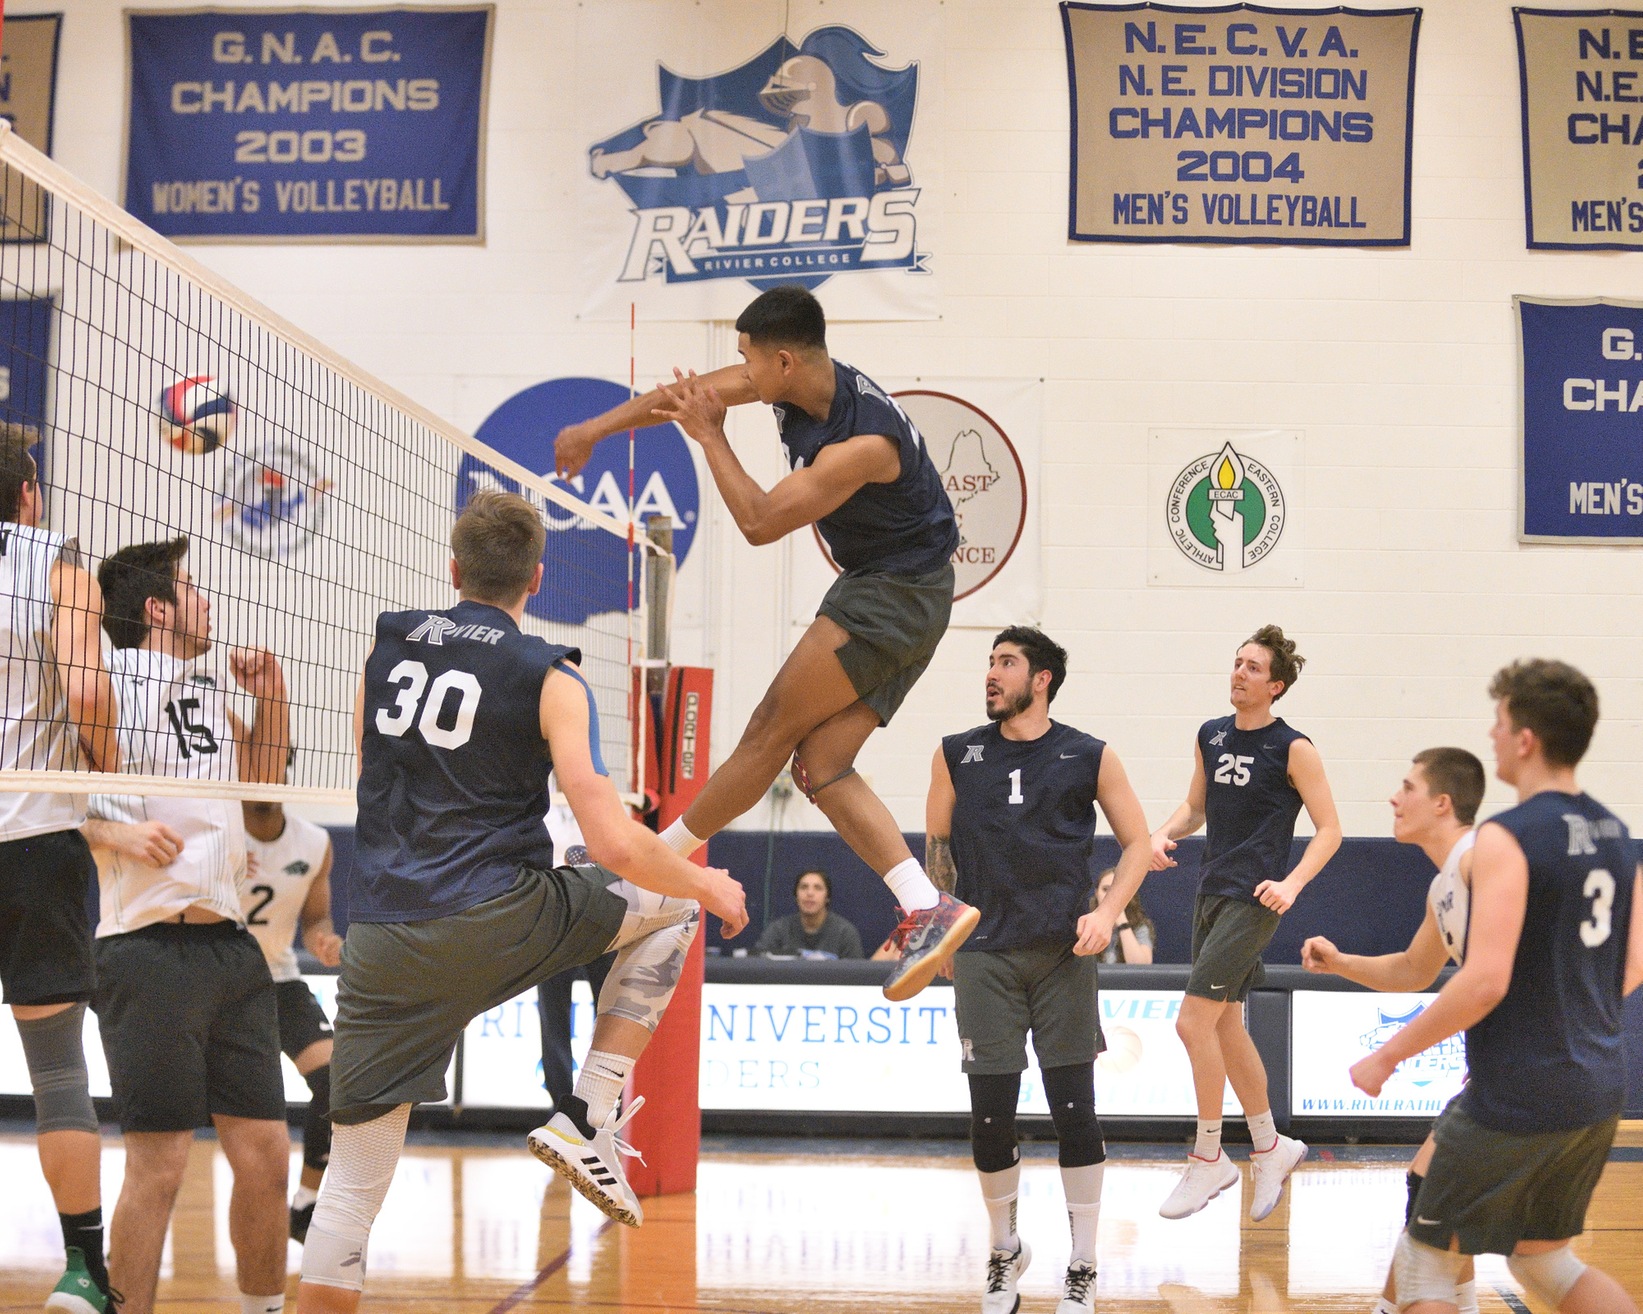 Men's Volleyball: Raiders dropped by No. 1 ranked Hawks, 1-3.